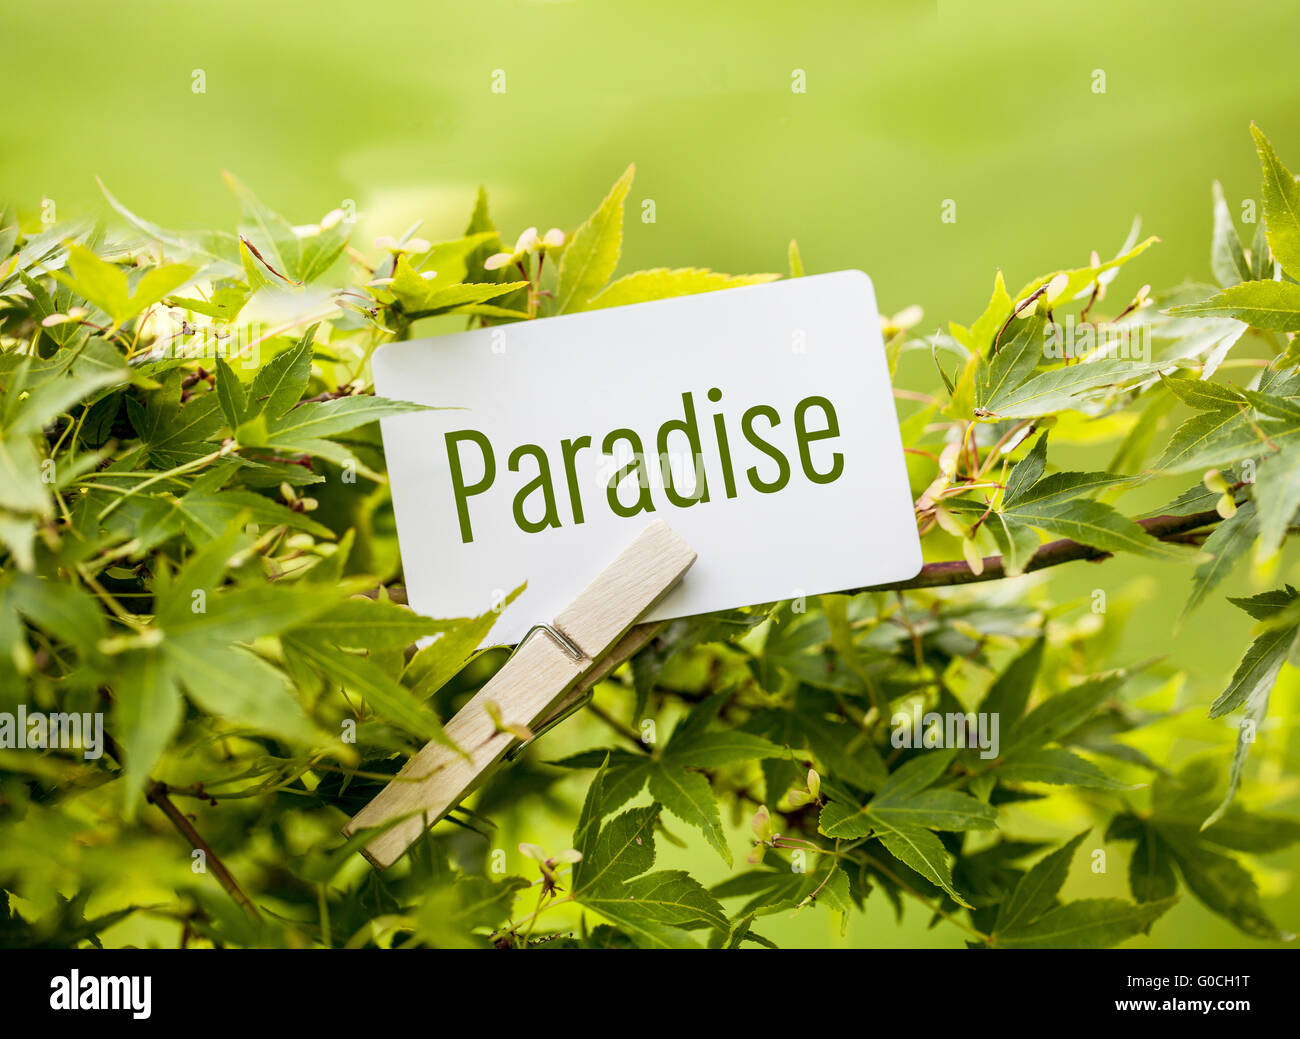 The Word  “Paradise“ in a fan-maple tree Stock Photo